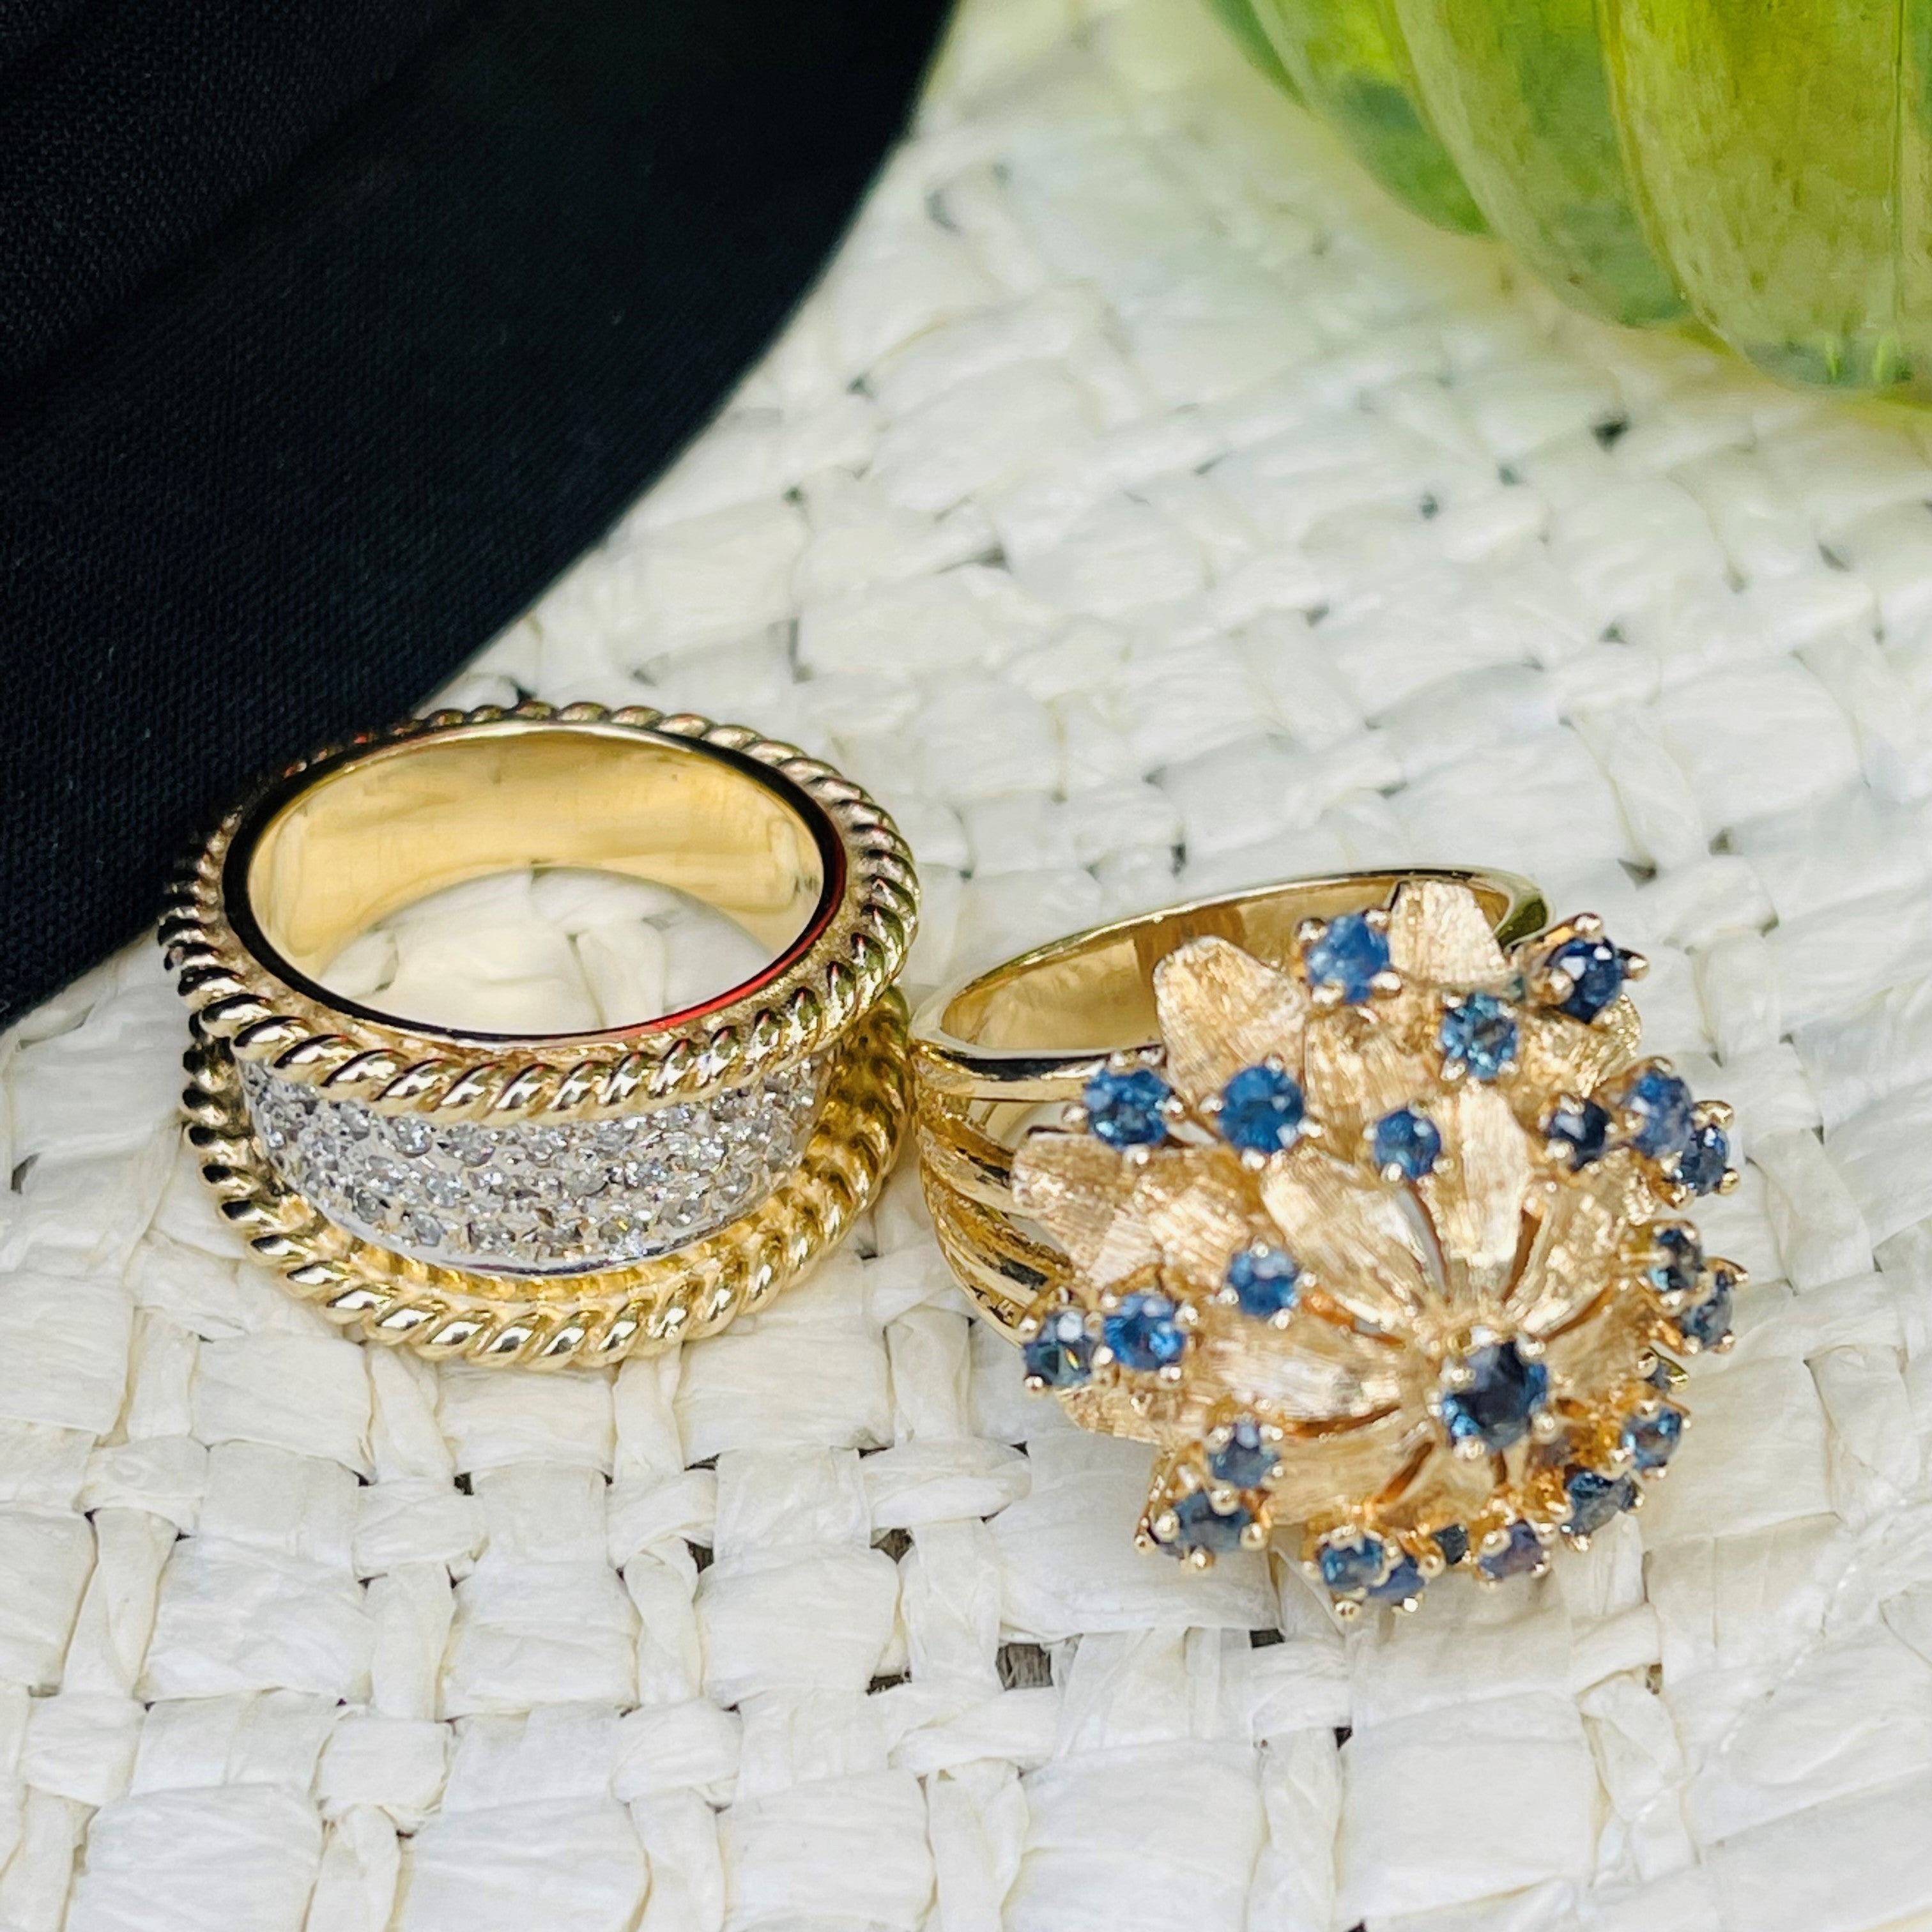 Vintage 1970s Bombé Sapphire Cocktail Ring, nicknamed "Le Cactus de Baroque Rocks" photographed on a white background with another vintage ring